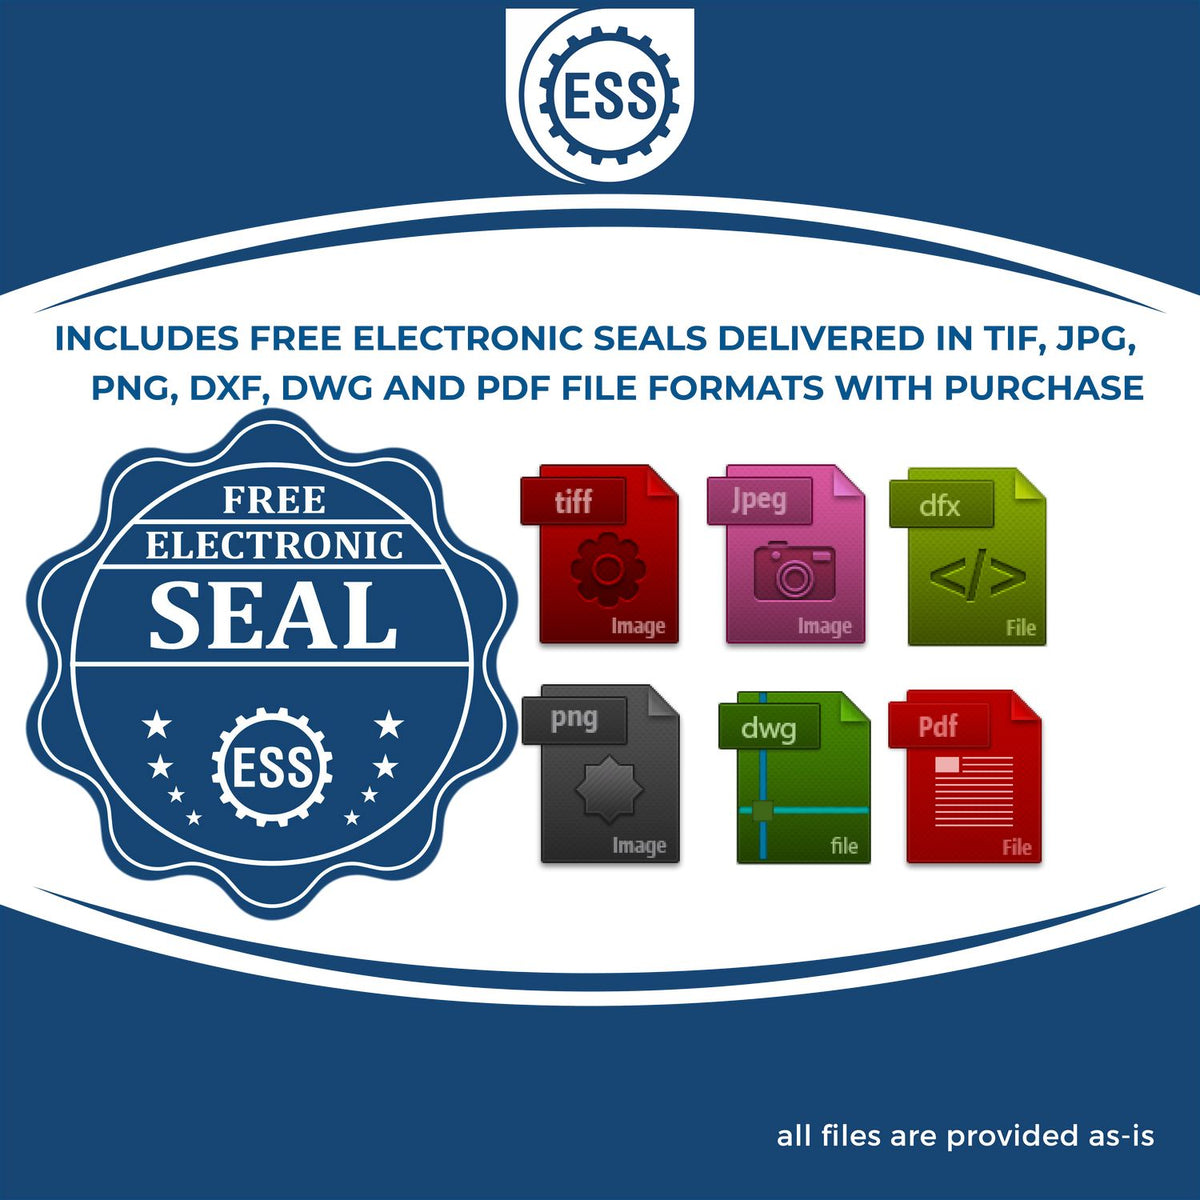 An infographic for the free electronic seal for the Hybrid Tennessee Engineer Seal illustrating the different file type icons such as DXF, DWG, TIF, JPG and PNG.